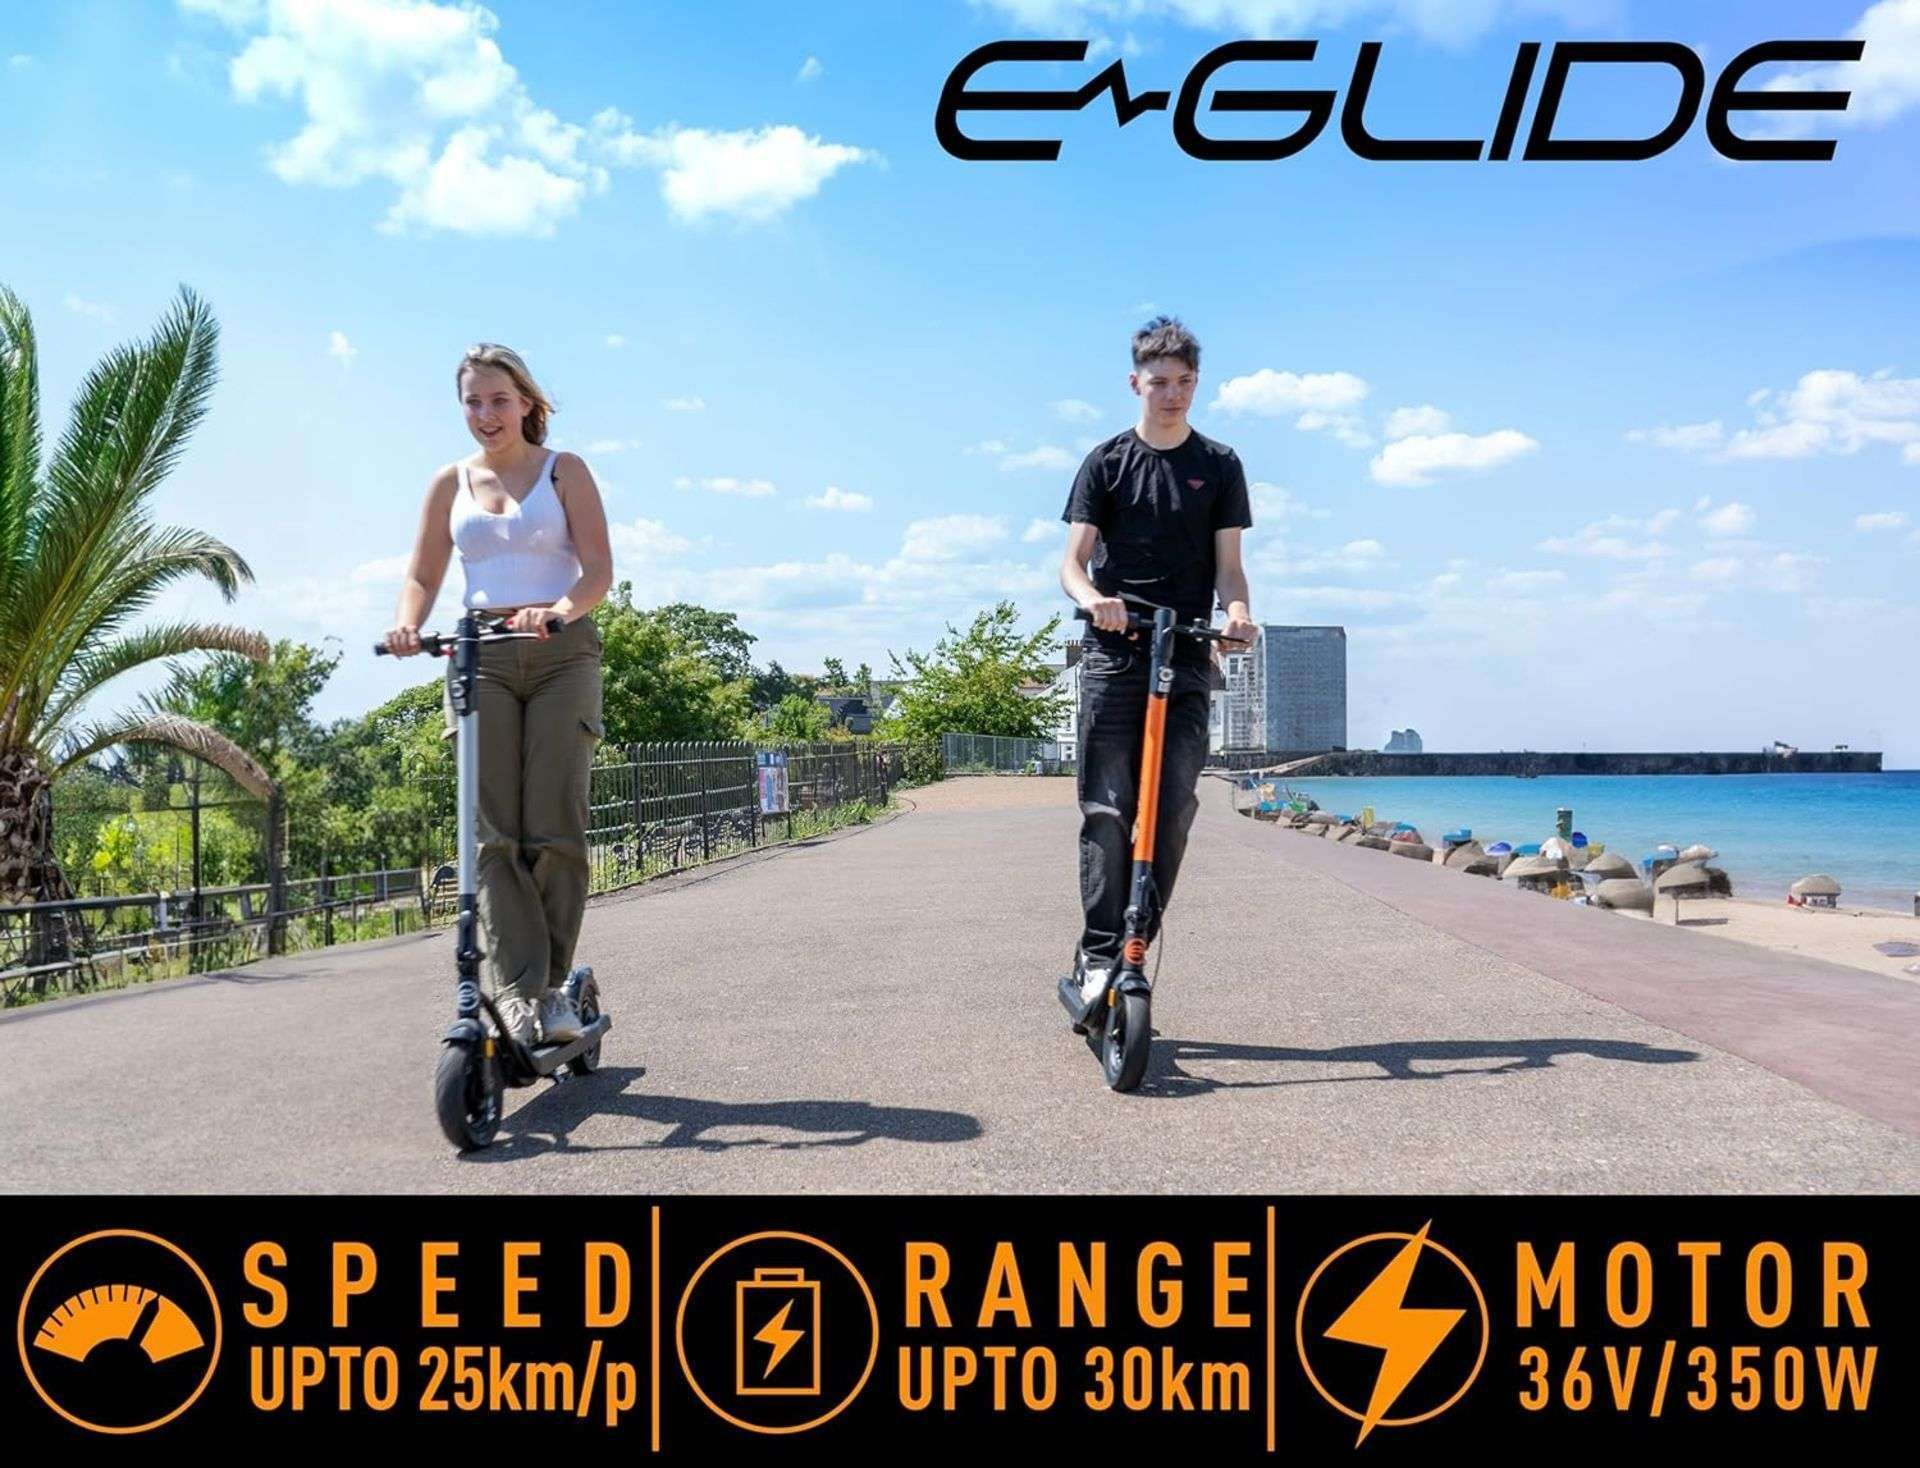 Brand New E-Glide V2 Electric Scooter Orange and Black RRP £599, Introducing a sleek and efficient - Image 3 of 4